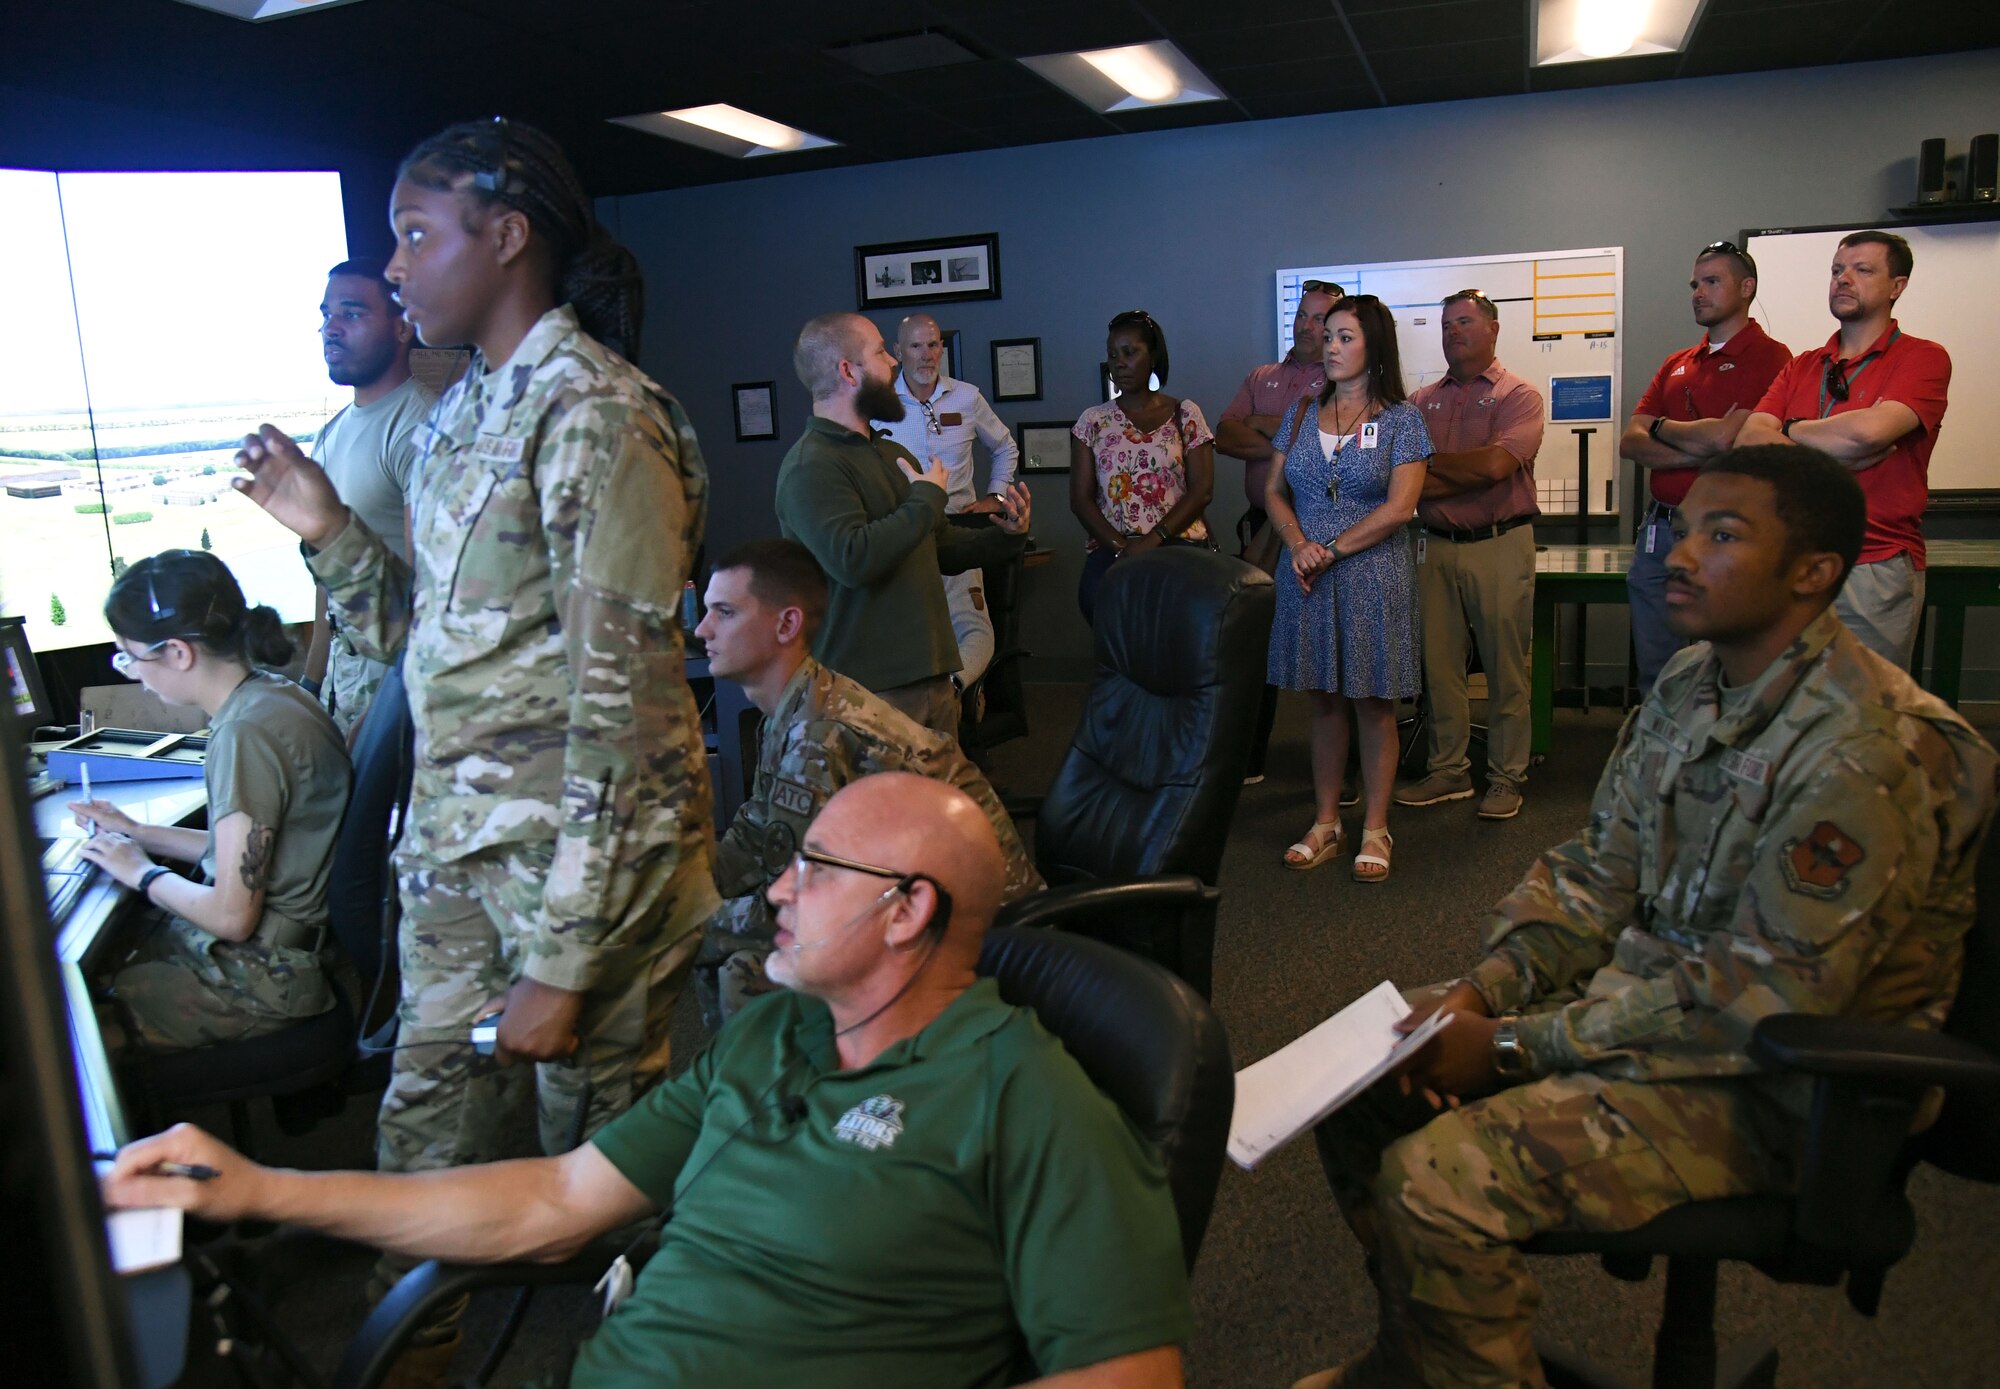 Members of the Biloxi and Jackson County School Districts administration tour the 334th Training Squadron air traffic control course inside Cody Hall at Keesler Air Force Base, Mississippi, July 7, 2022. The visit also included a tour of the student dorms and the weather training course. (U.S. Air Force photo by Kemberly Groue)